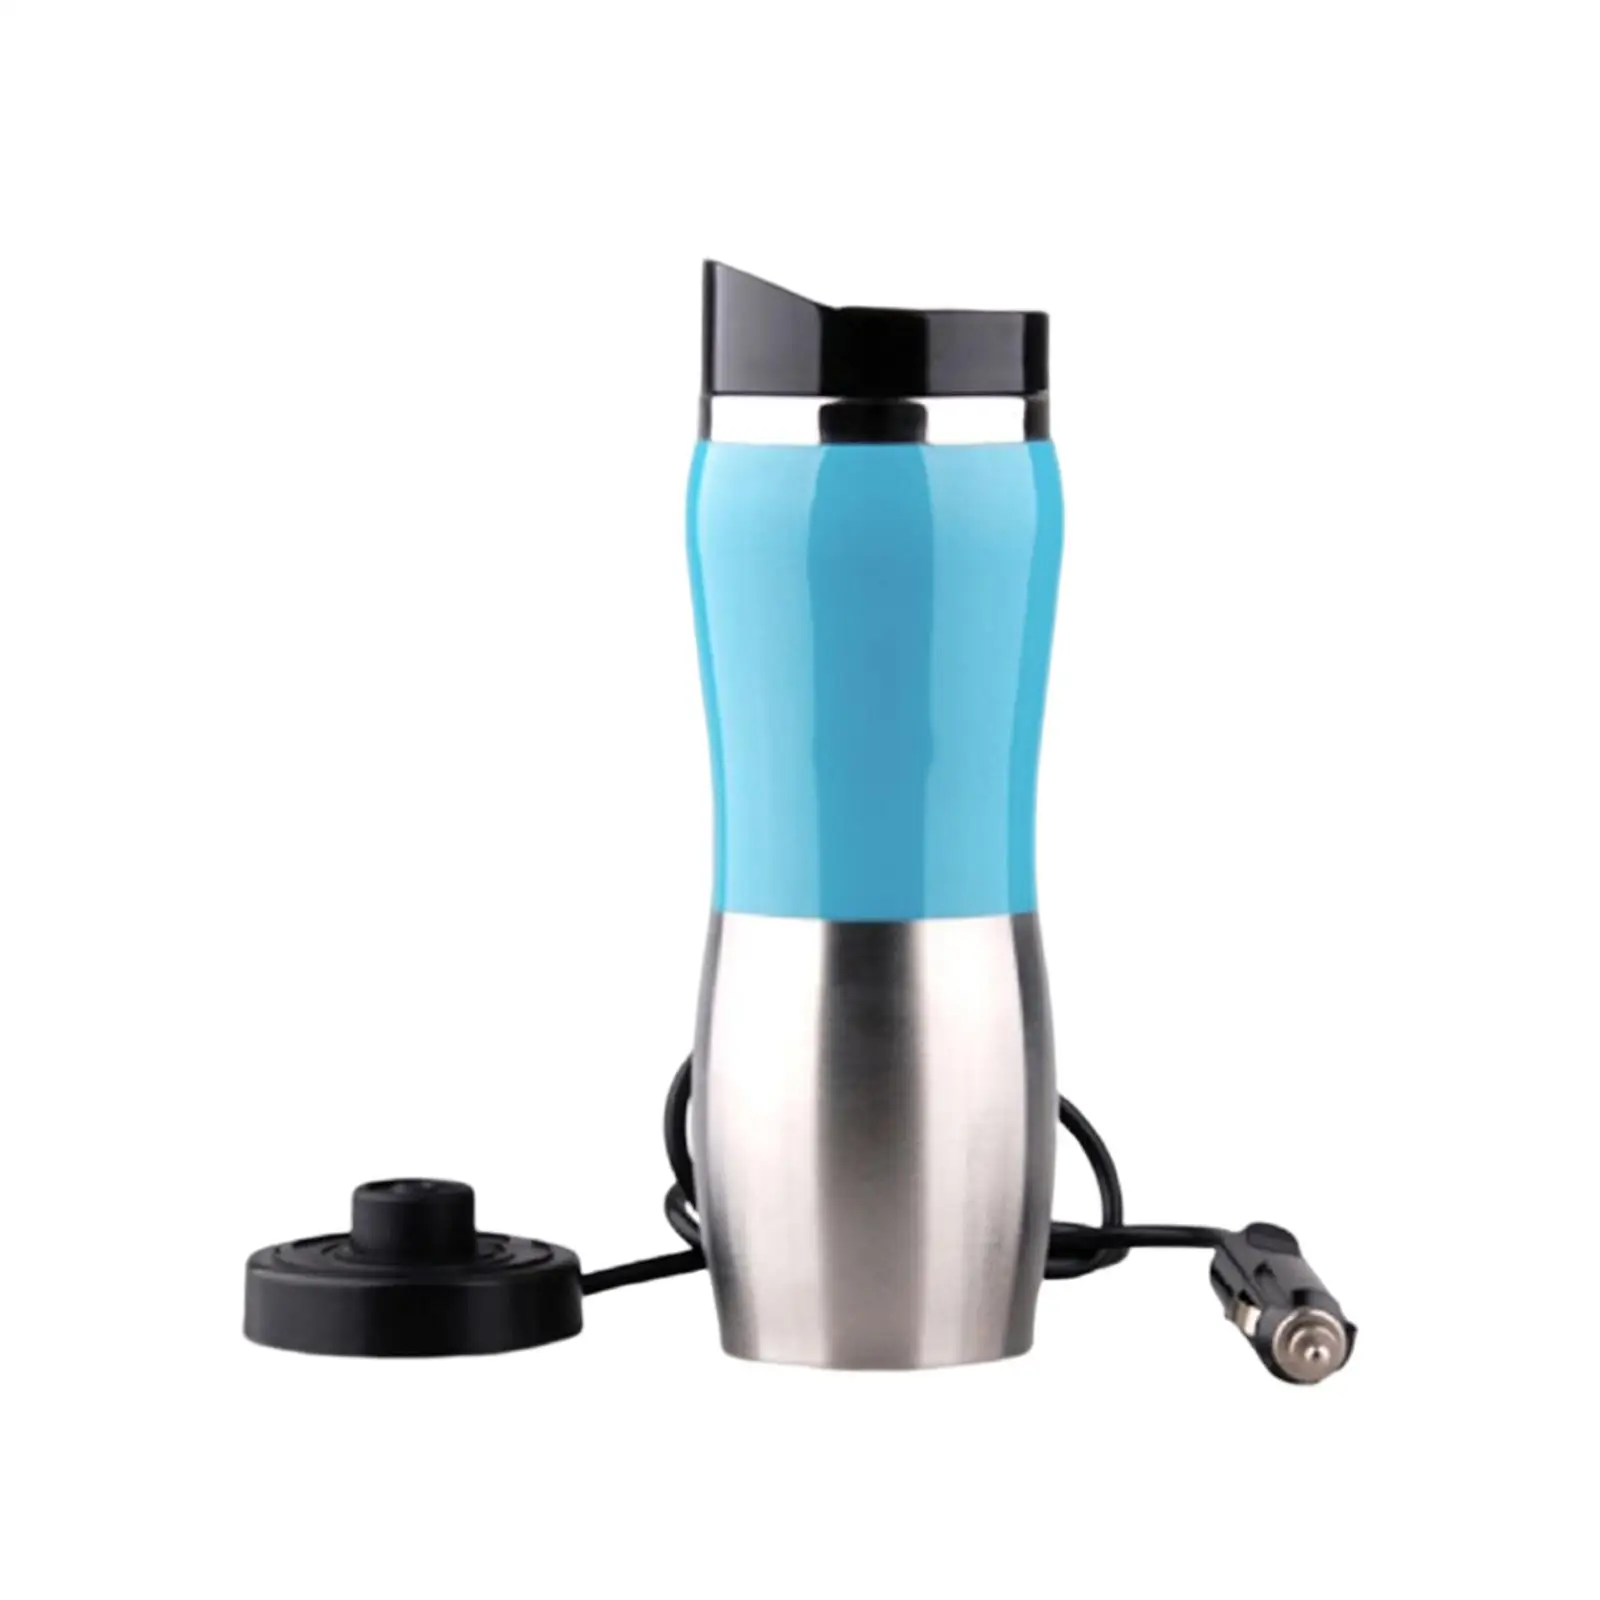  Kettle, 24V, 400ml, Stainless Steel, Travel, Heating Cup, Auto Heating Bottle Mug for Tea  Making Camping Boat Travel